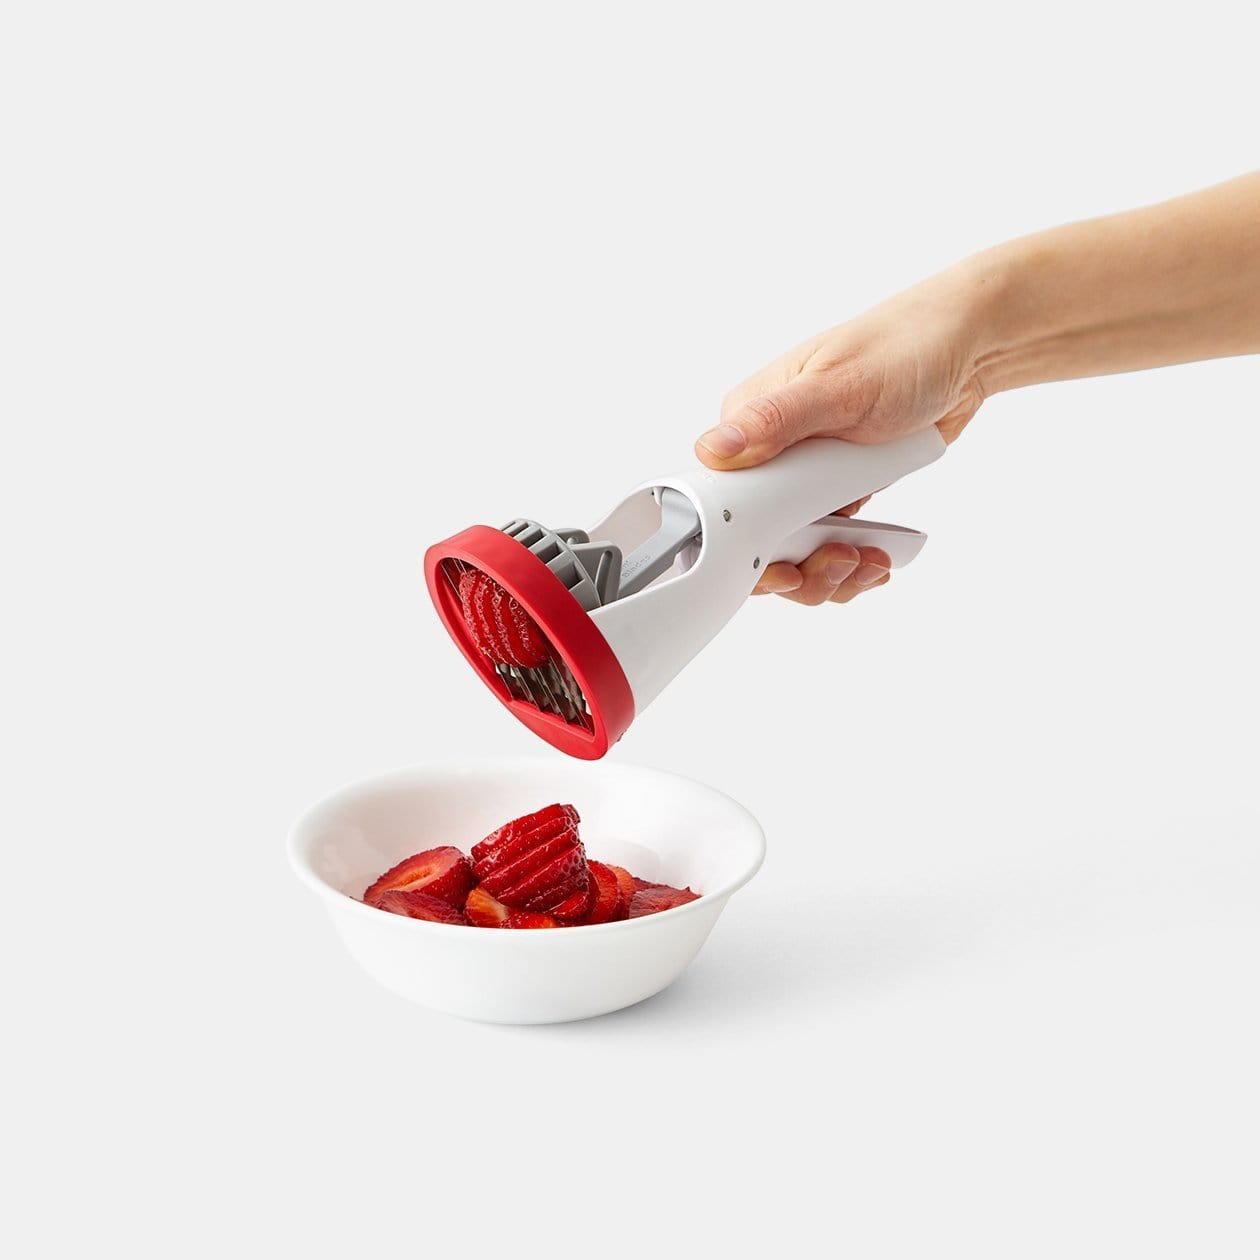 Strawberry Slicer Kitchen Gadget Cute Strawberry Cutter Slicer with  Stainless